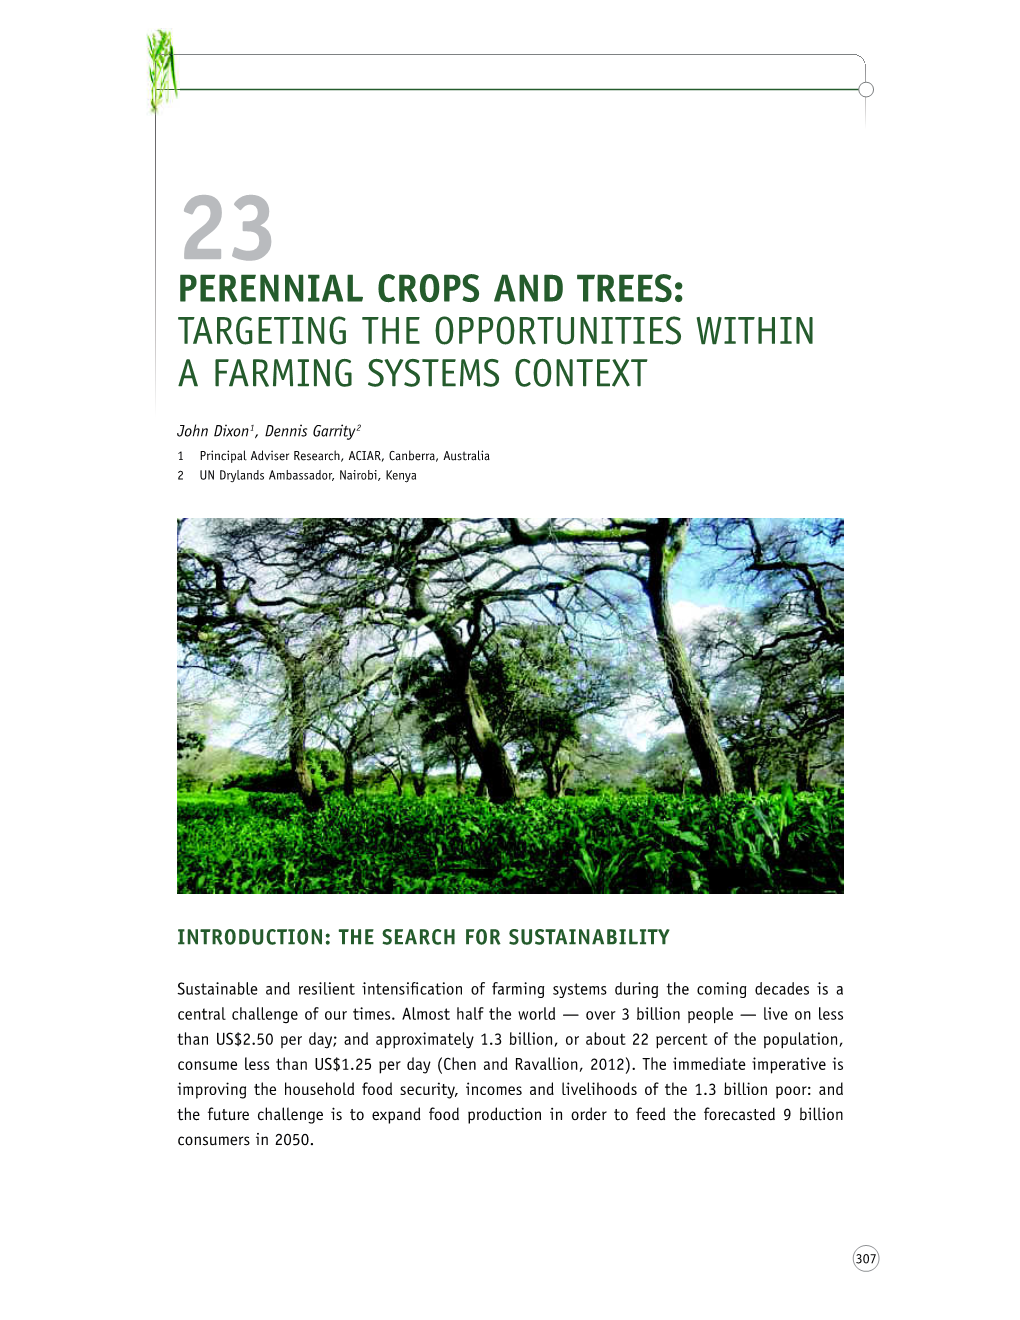 Perennial Crops and Trees: Targeting the Opportunities Within a Farming Systems Context